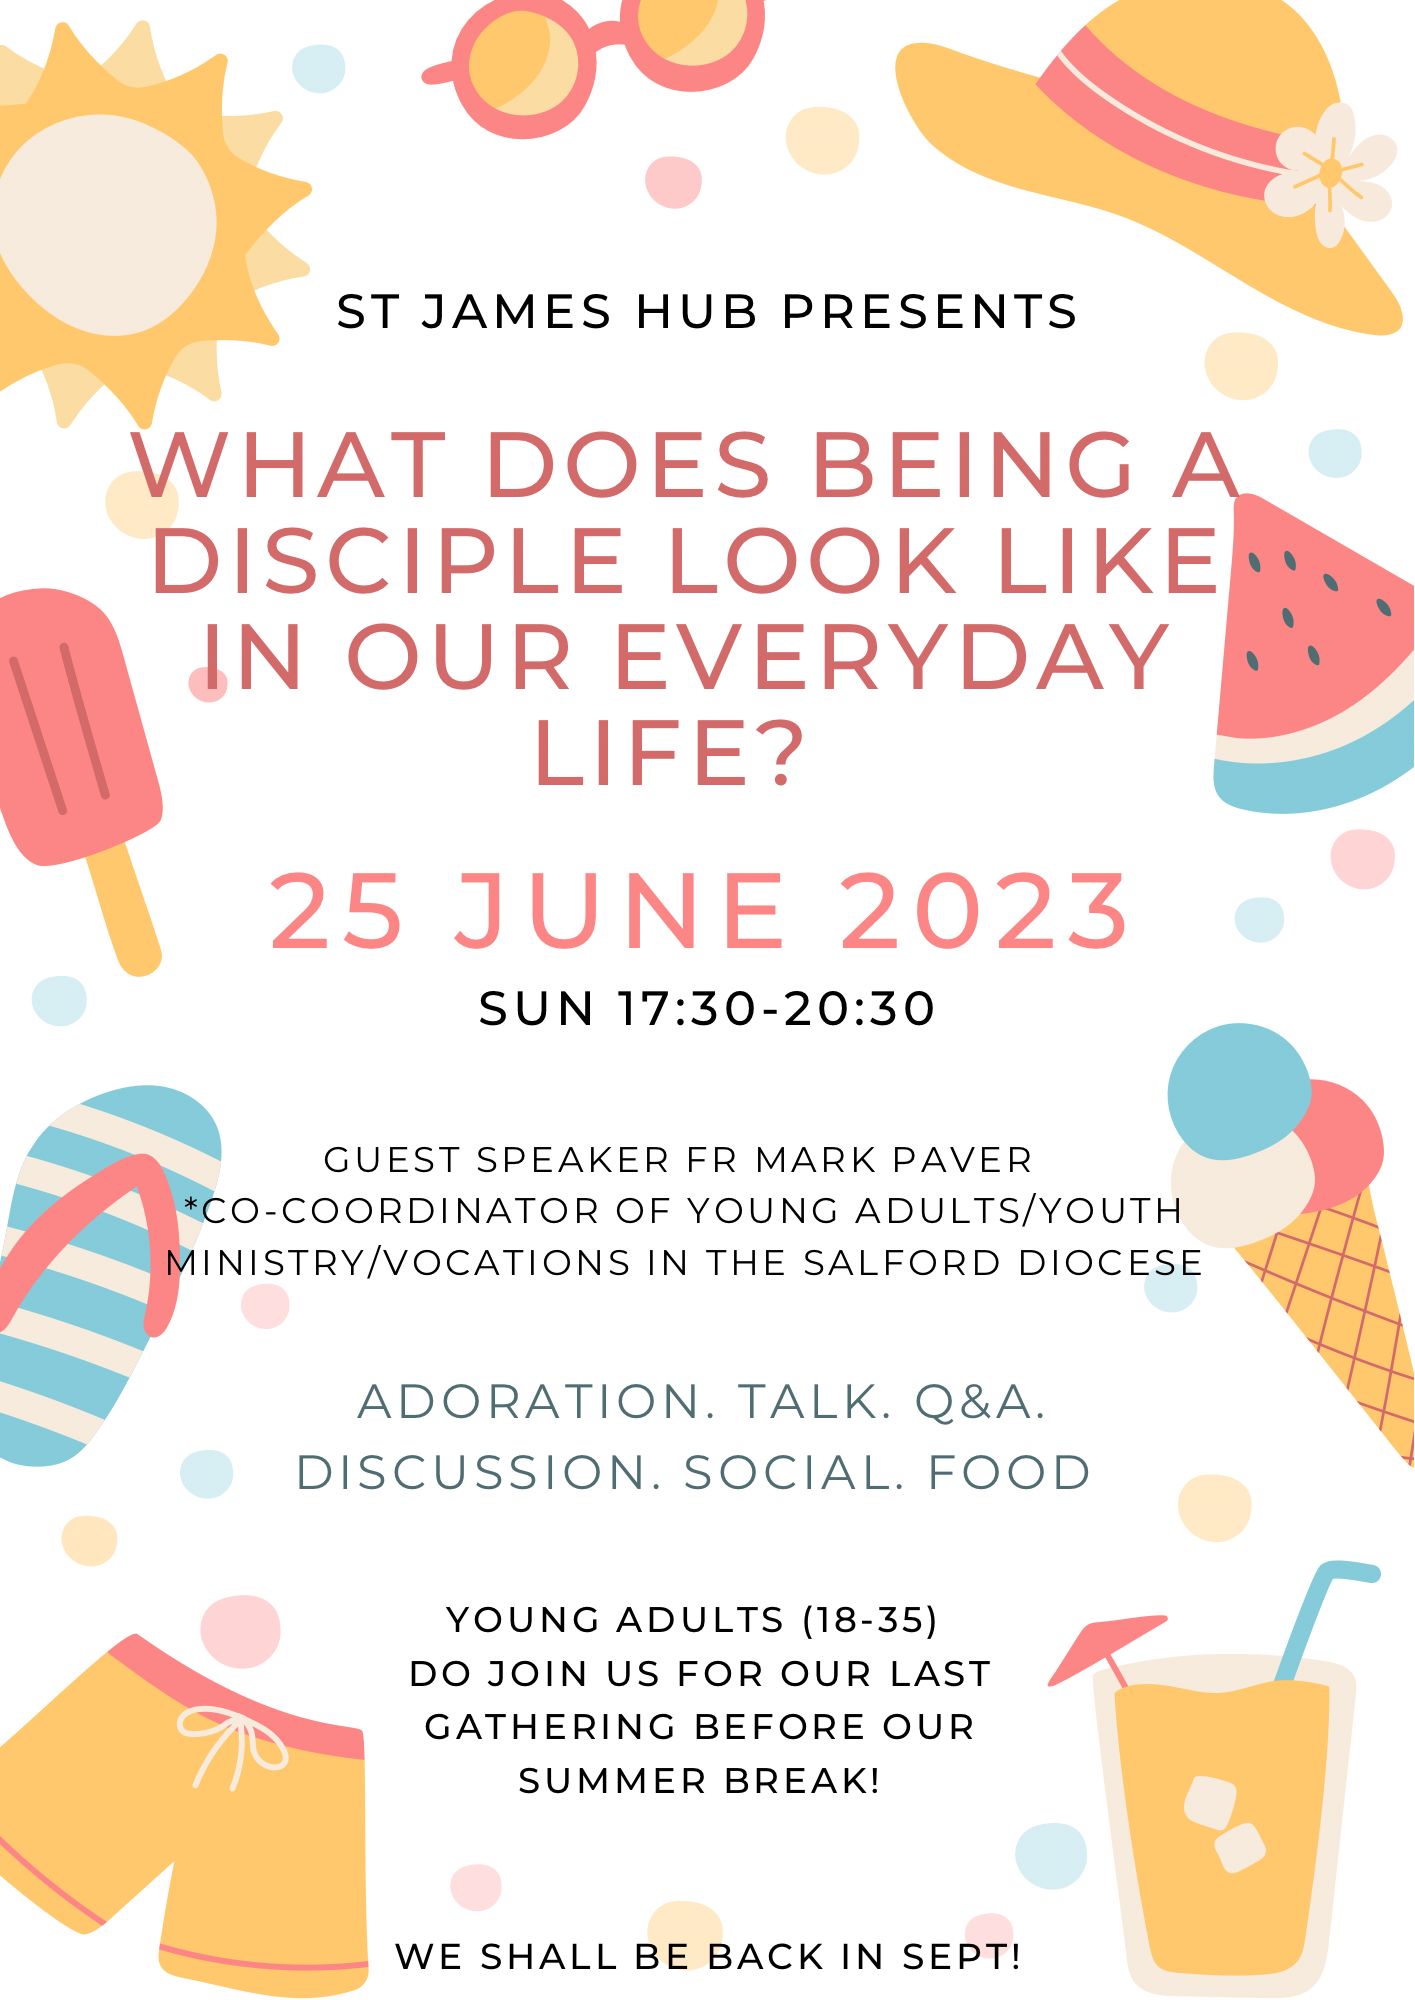 Poster with details of this month's St James Hub, as described in the article